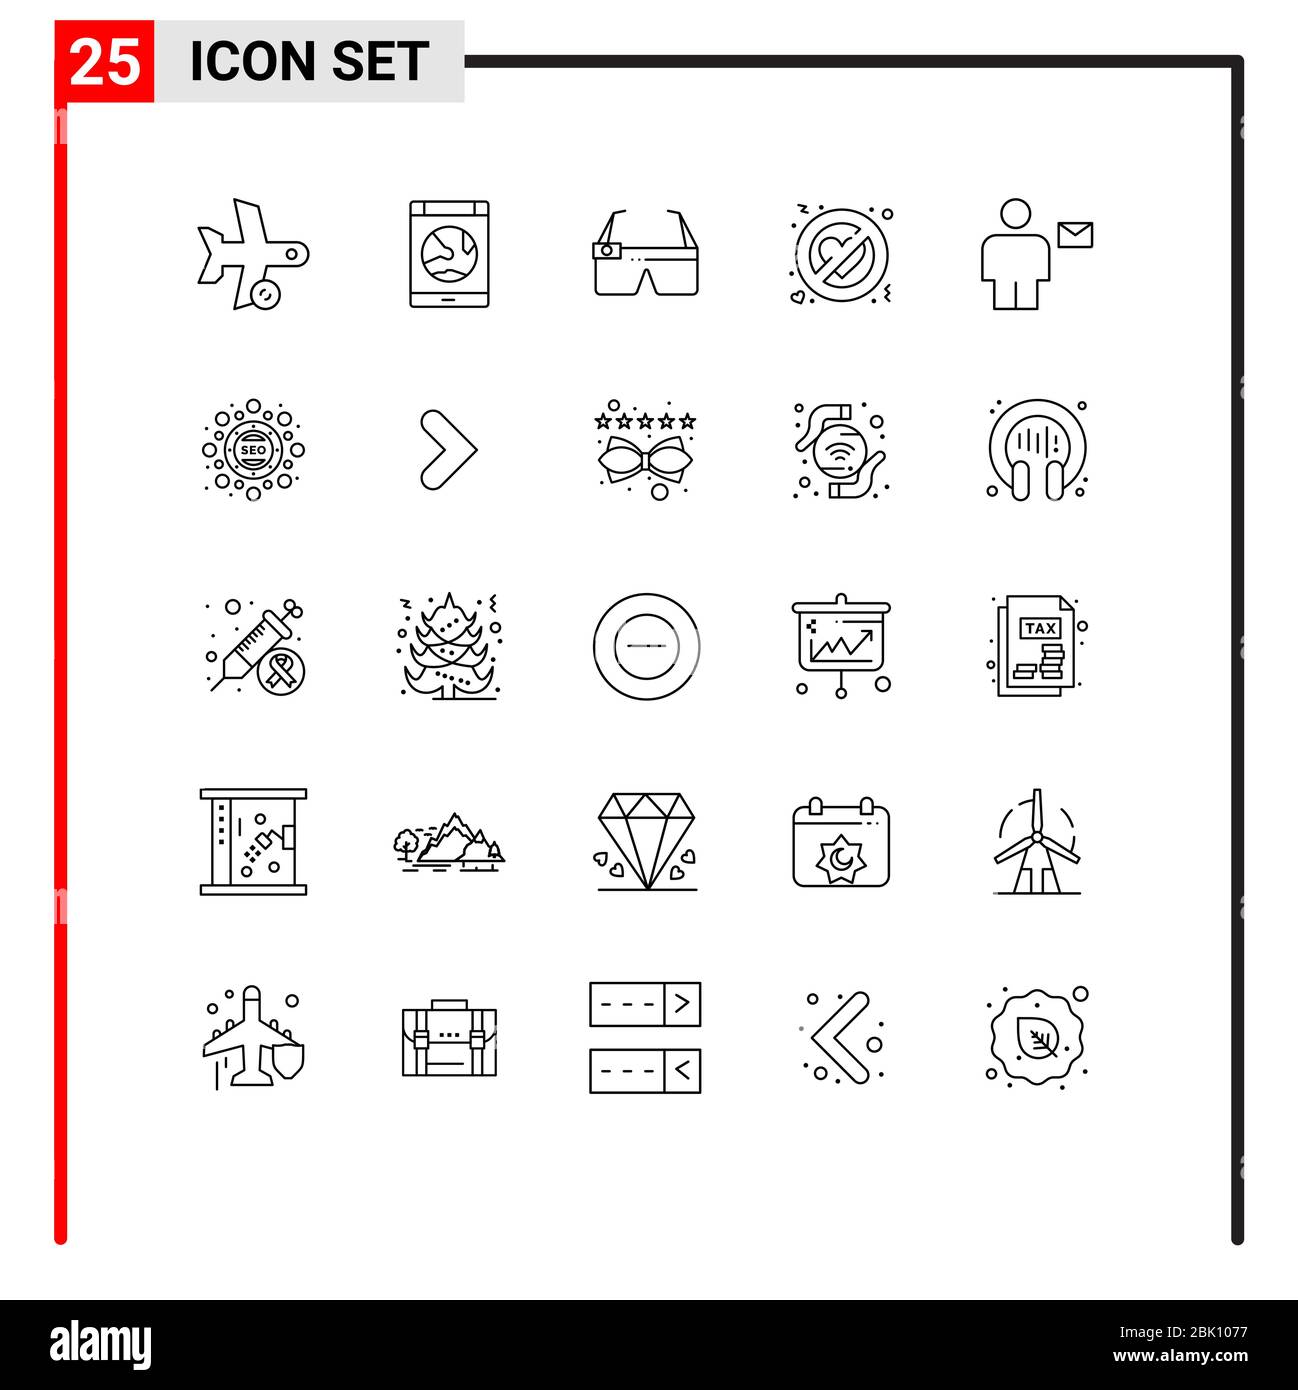 Mobile Interface Line Set of 25 Pictograms of forbidden, no love, online, adultery, google glass Editable Vector Design Elements Stock Vector